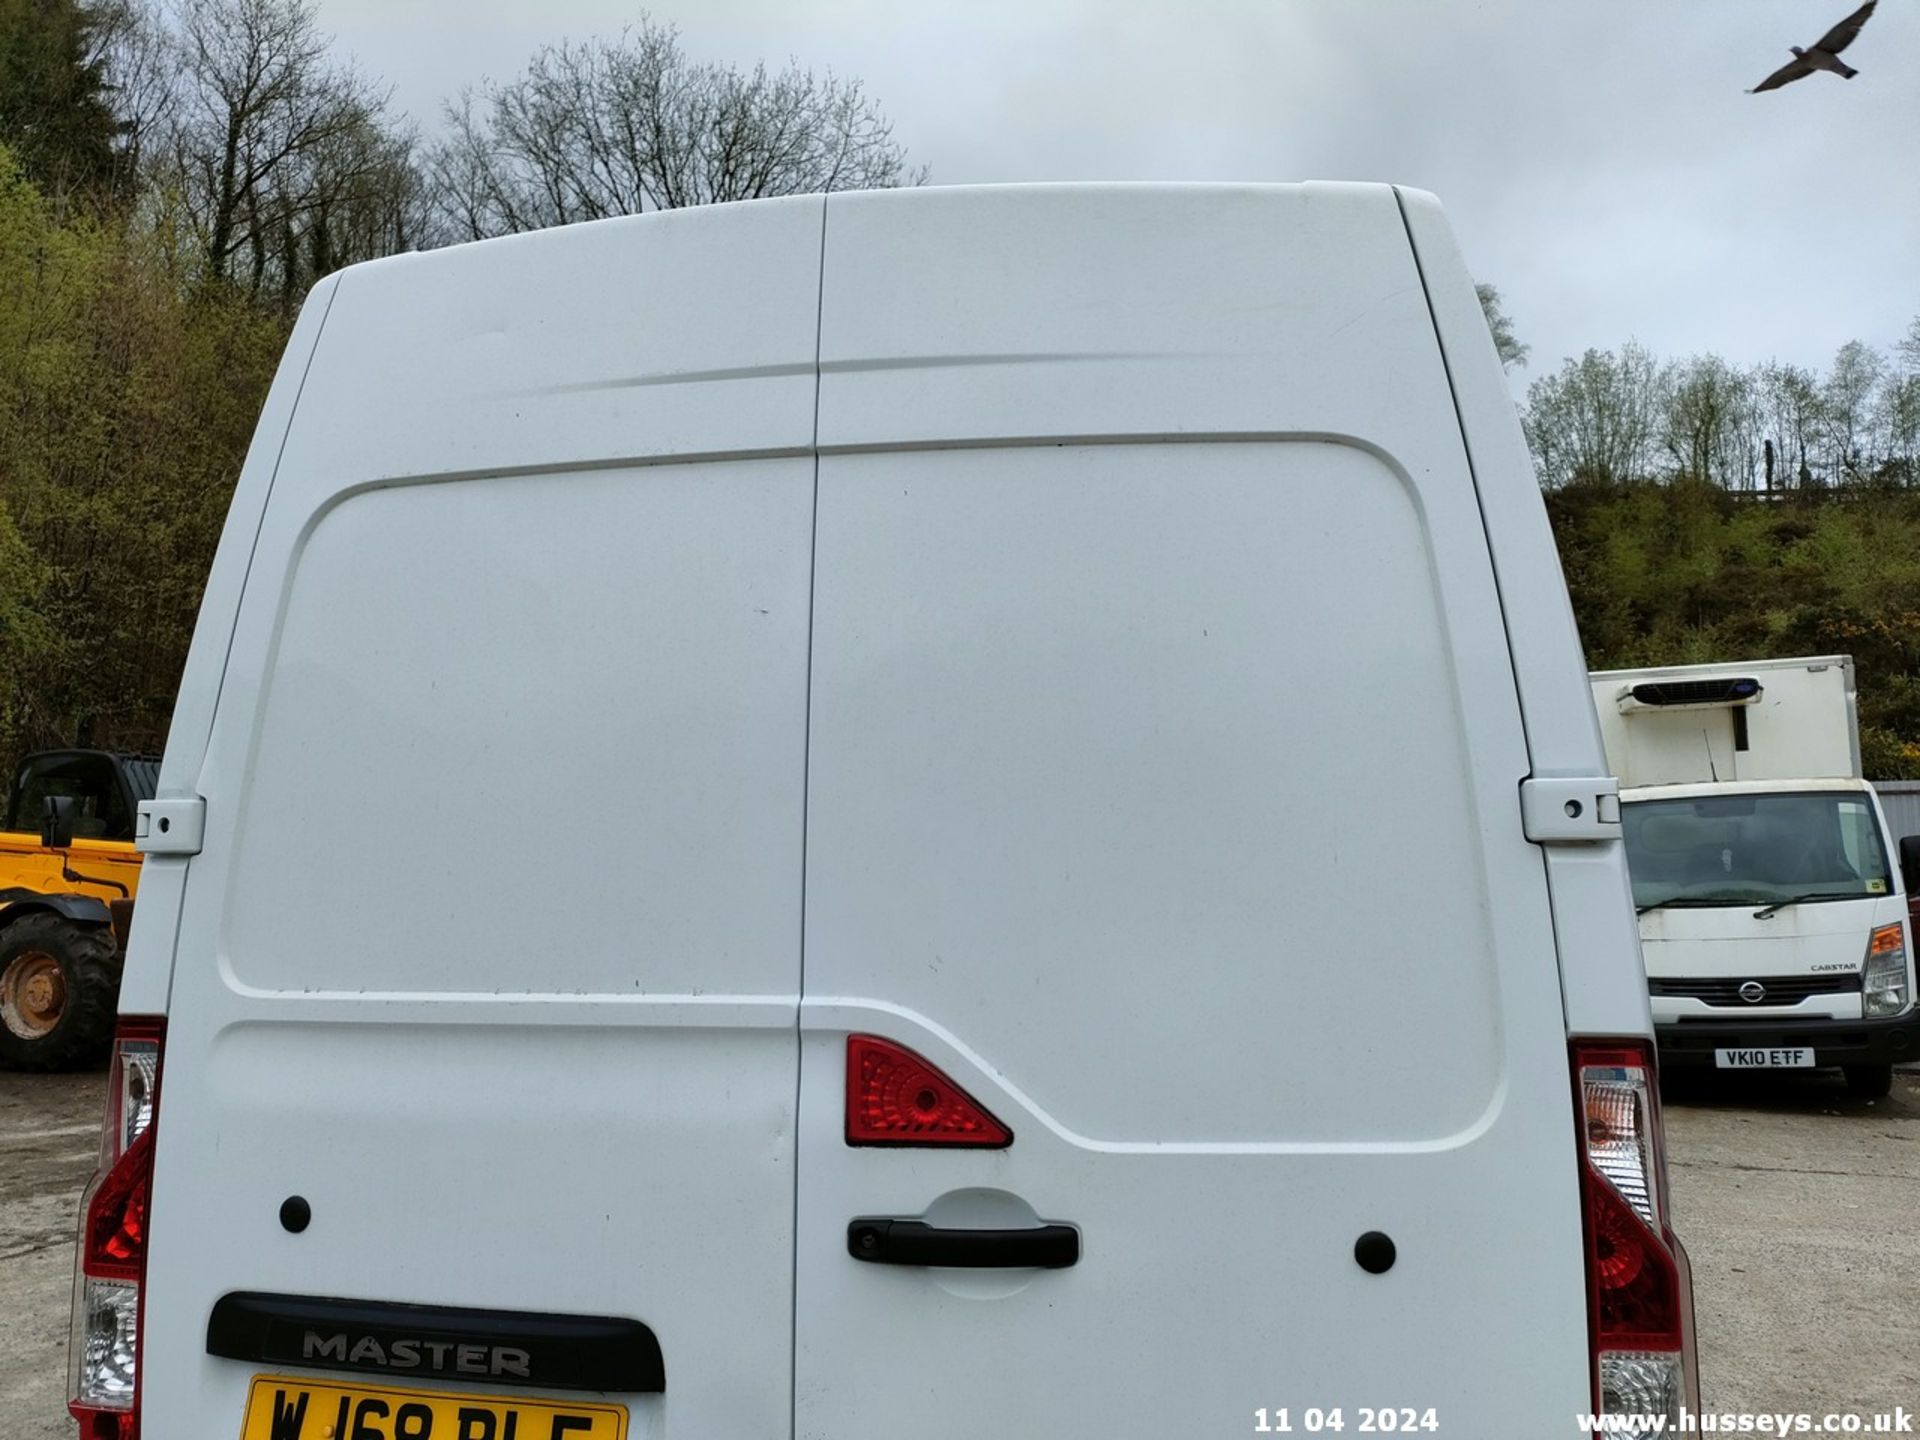 18/68 RENAULT MASTER LM35 BUSINESS DCI - 2298cc 5dr Van (White) - Image 39 of 68